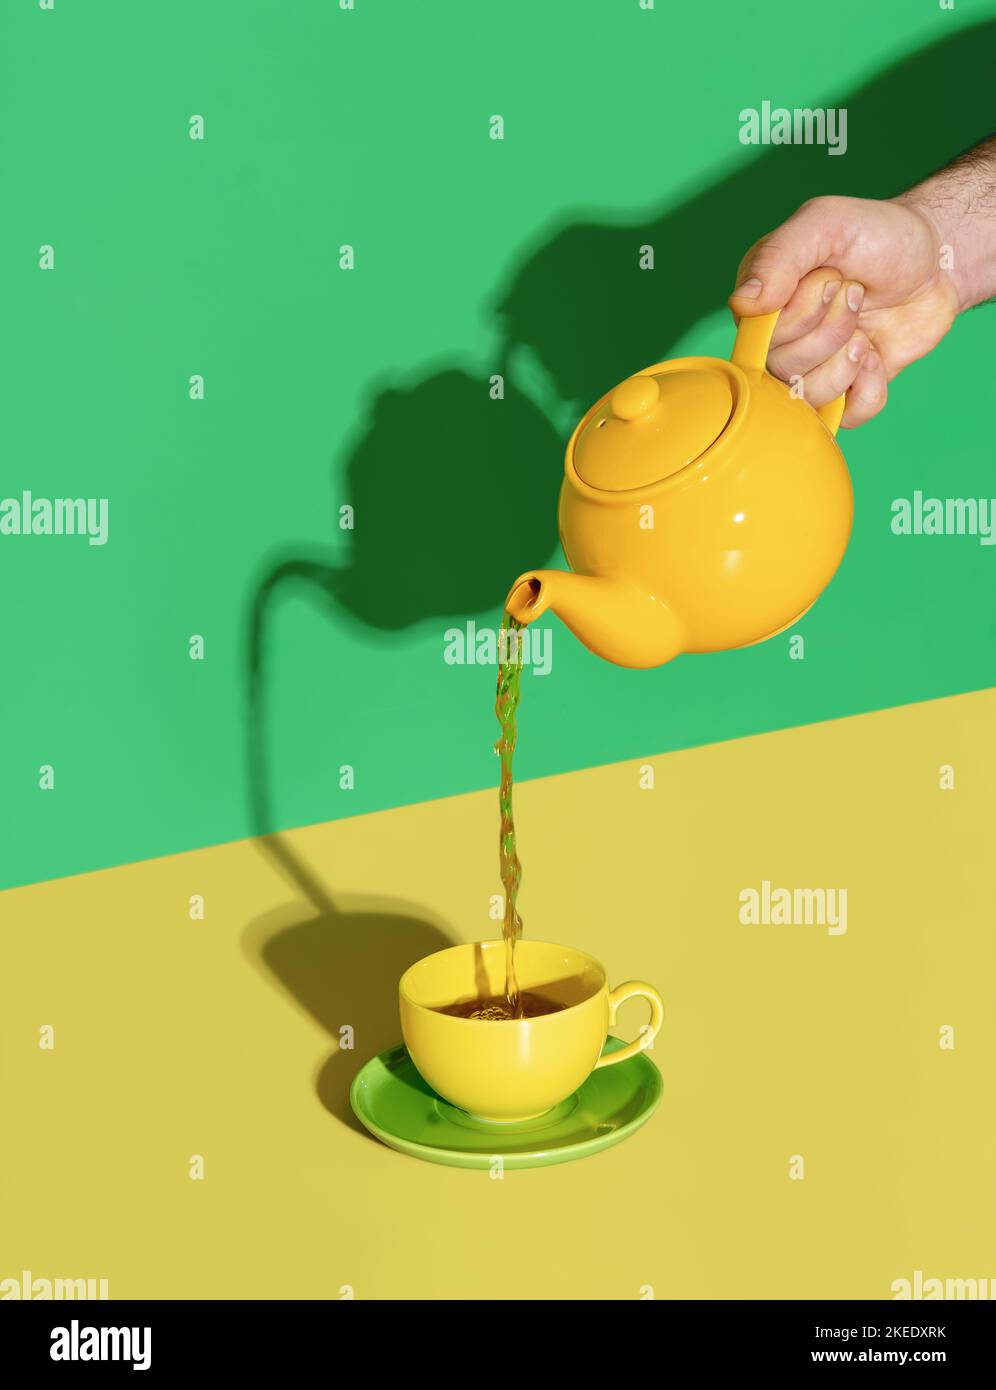 Pouring hot mint tea in a cup, in bright light on a yellow colored table. Pouring tea from a yellow teapot. Stock Photo